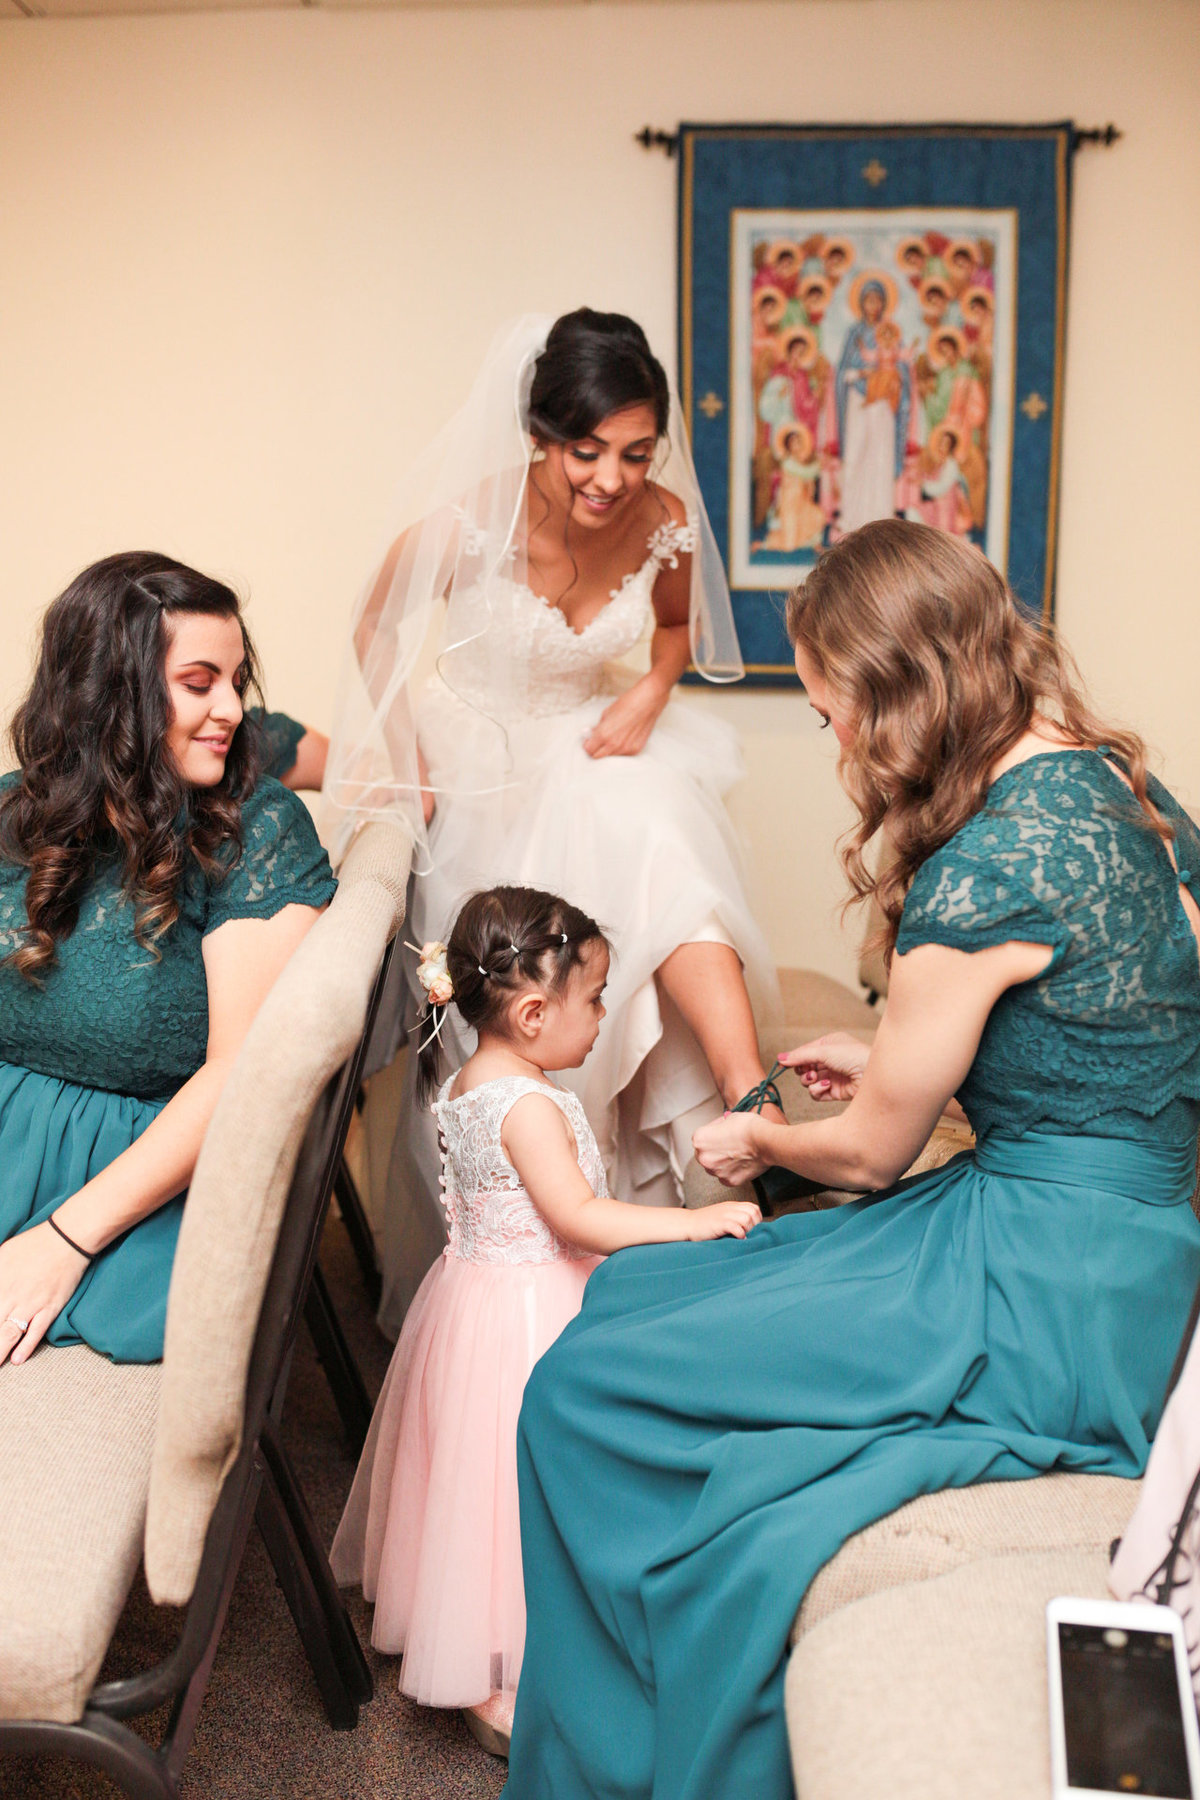 Albuquerque Wedding Photographer_Our Lady of the Annunciation Parish_www.tylerbrooke.com_009